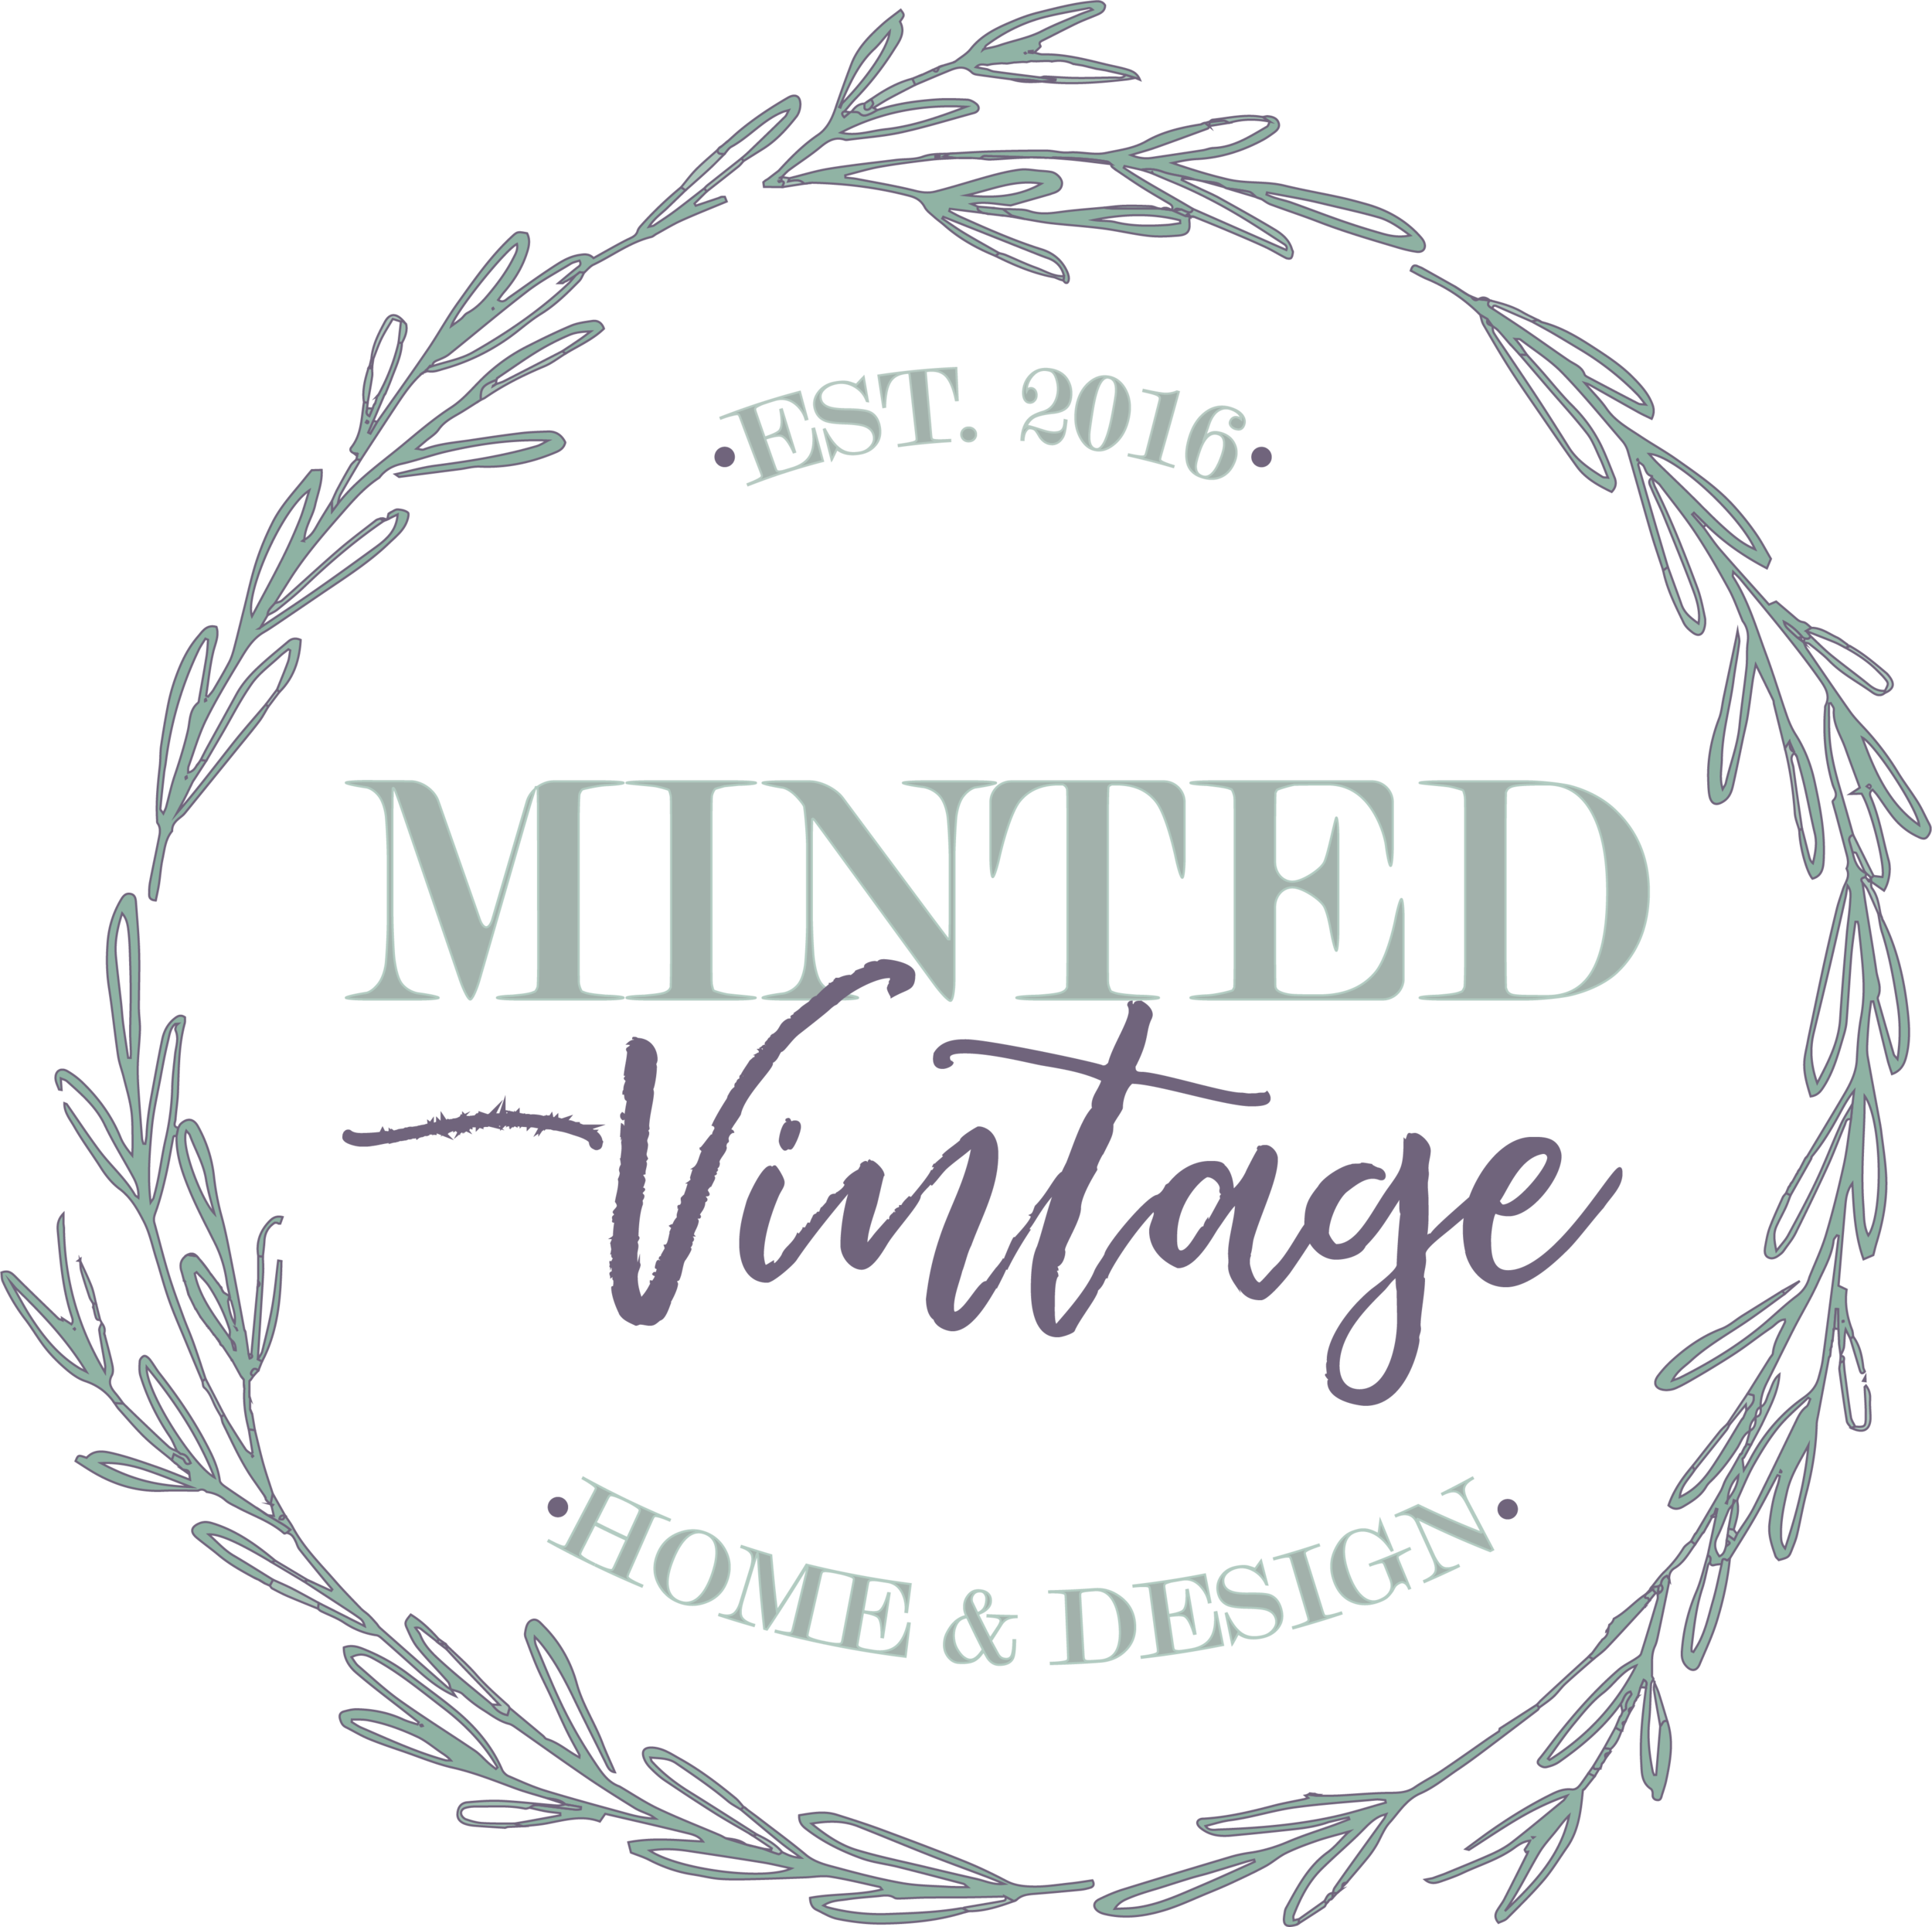 The Minted Vintage